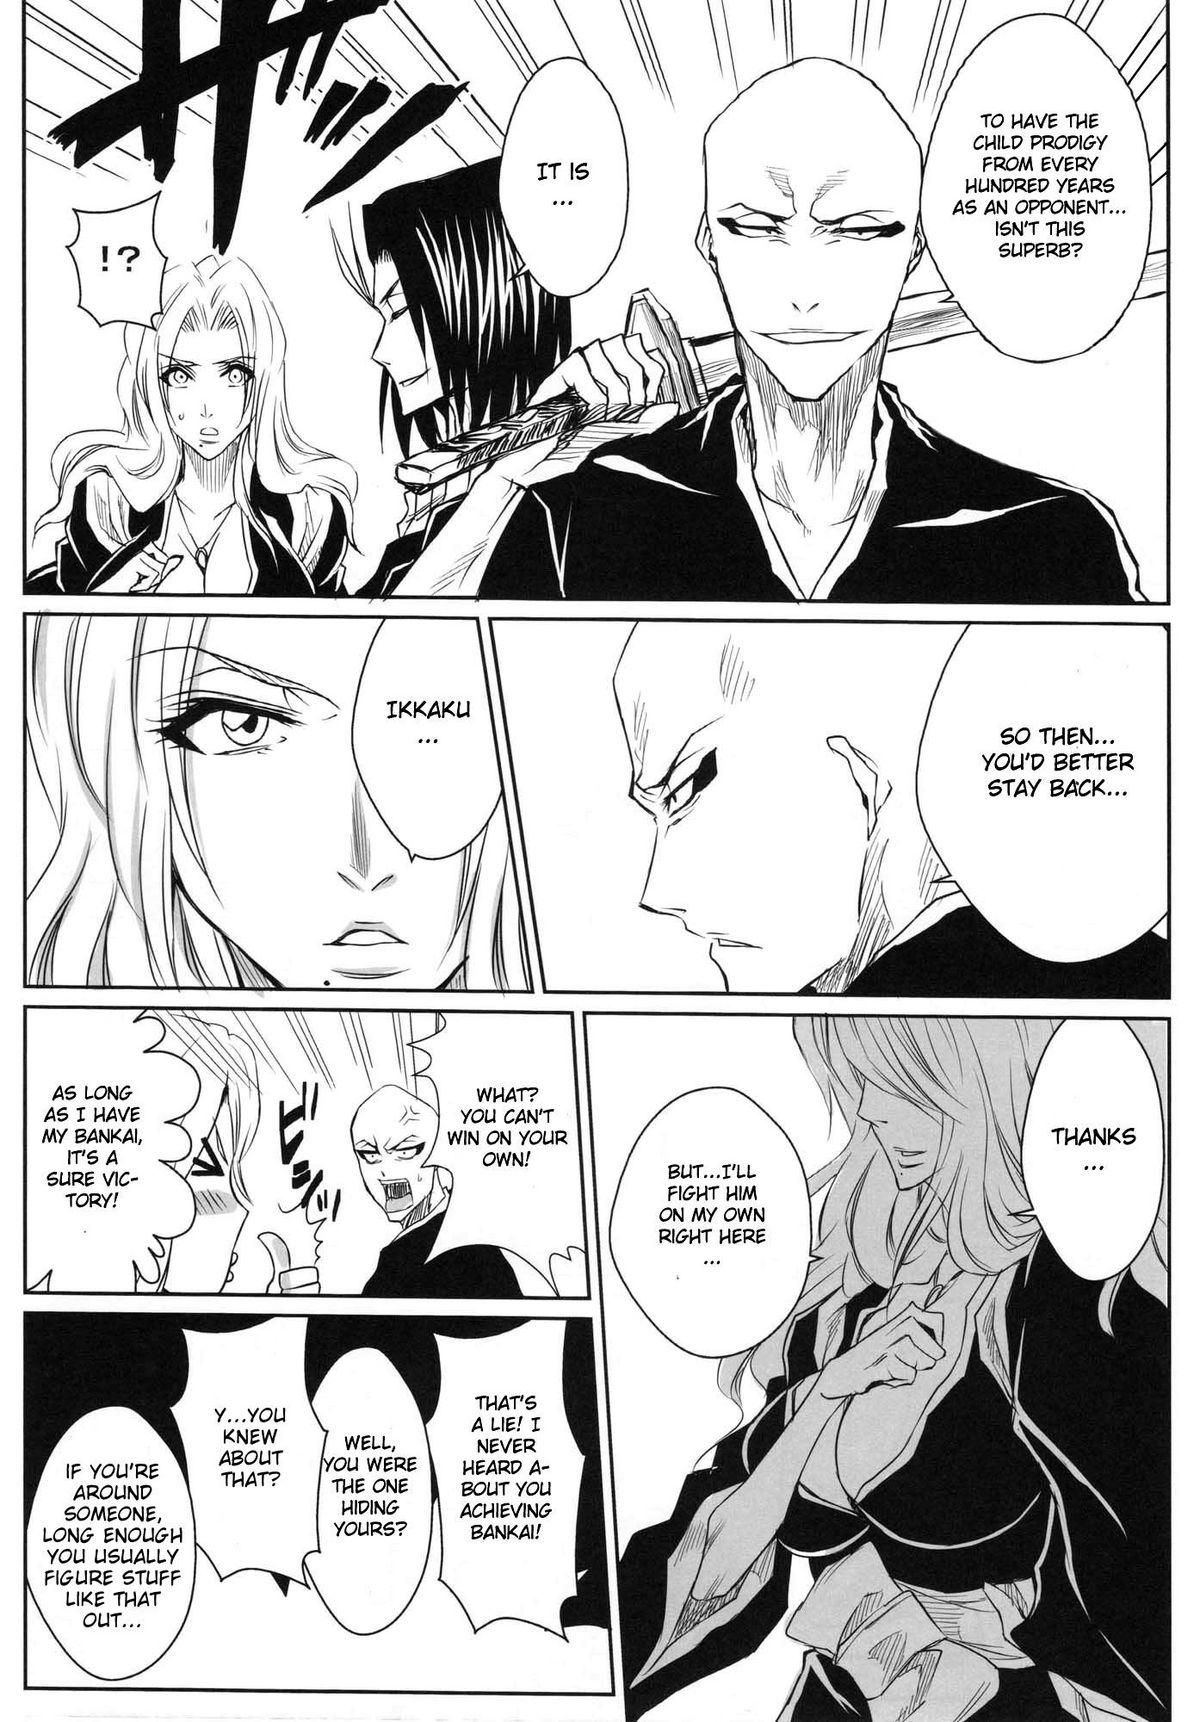 Chacal Shi | Winter 2 - Bleach Whores - Page 7